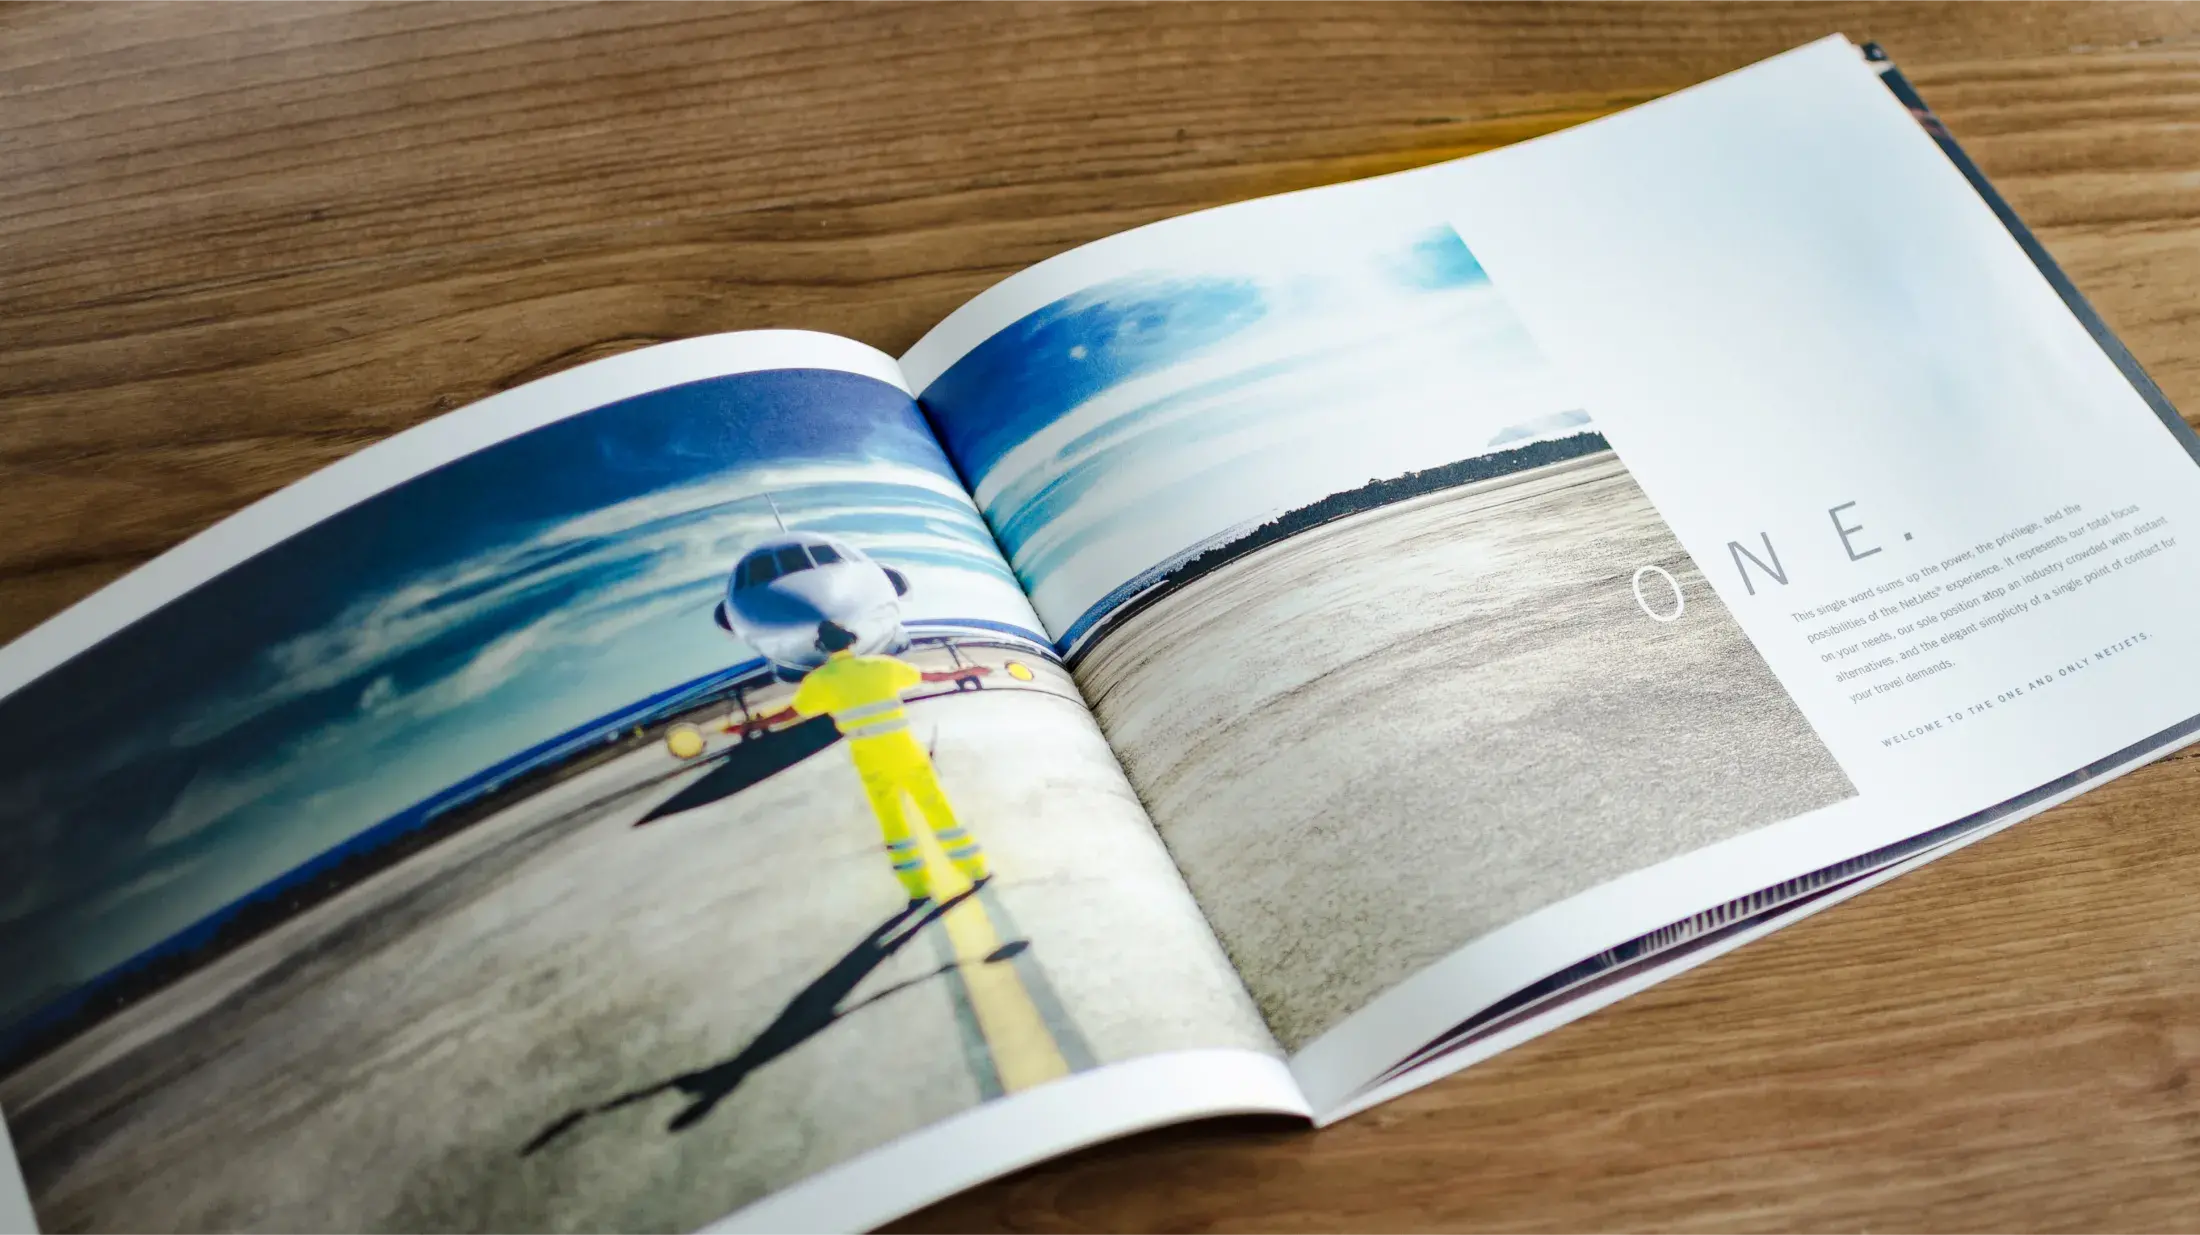 full span of open book, page titled "O N E." with focus on image of jet on runway spilling across the pages 